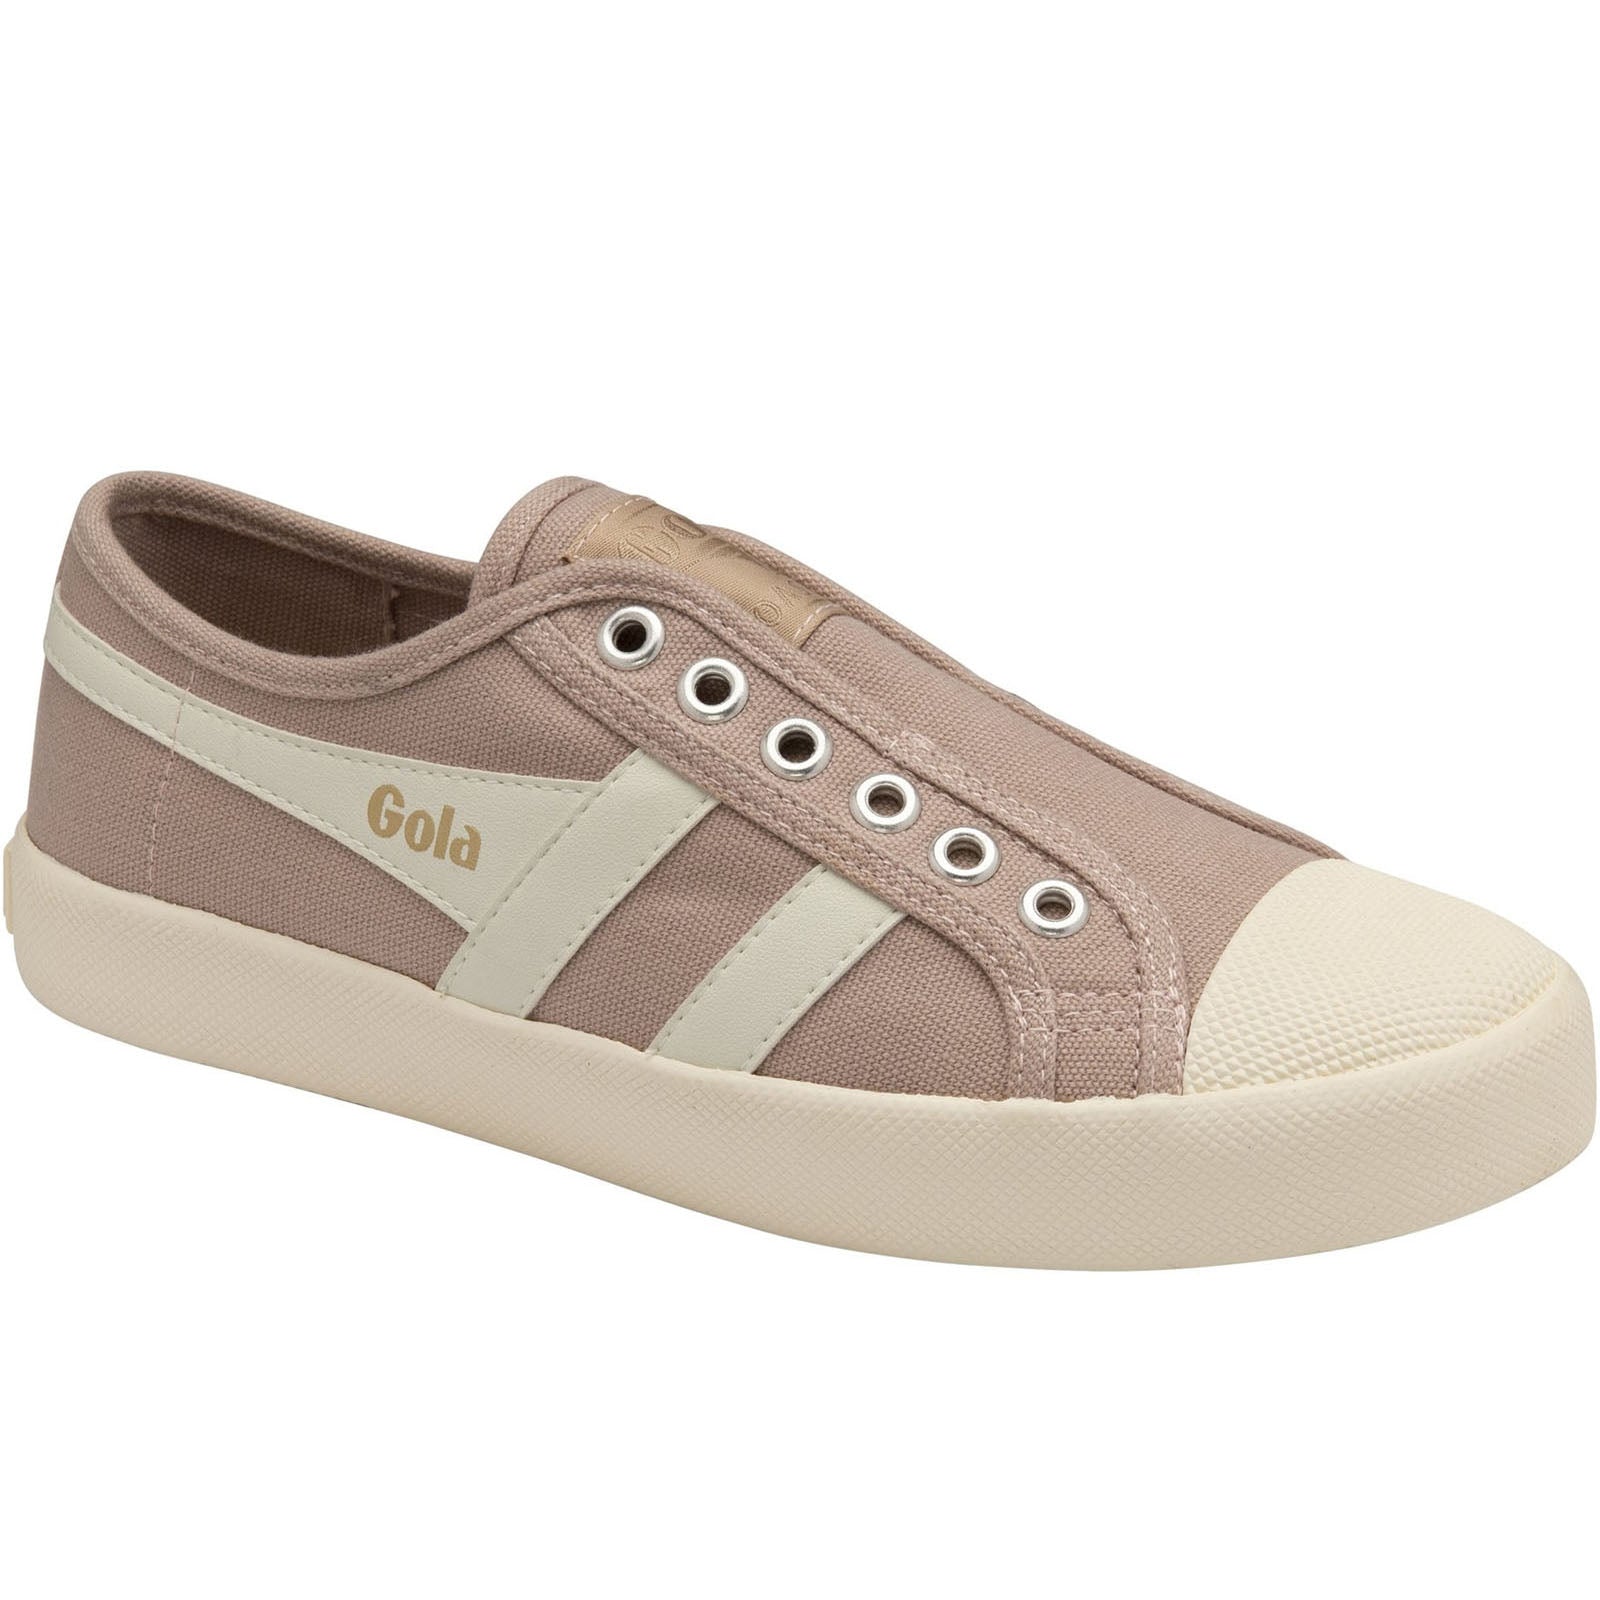 Gola Trainers for Women - Begg Shoes